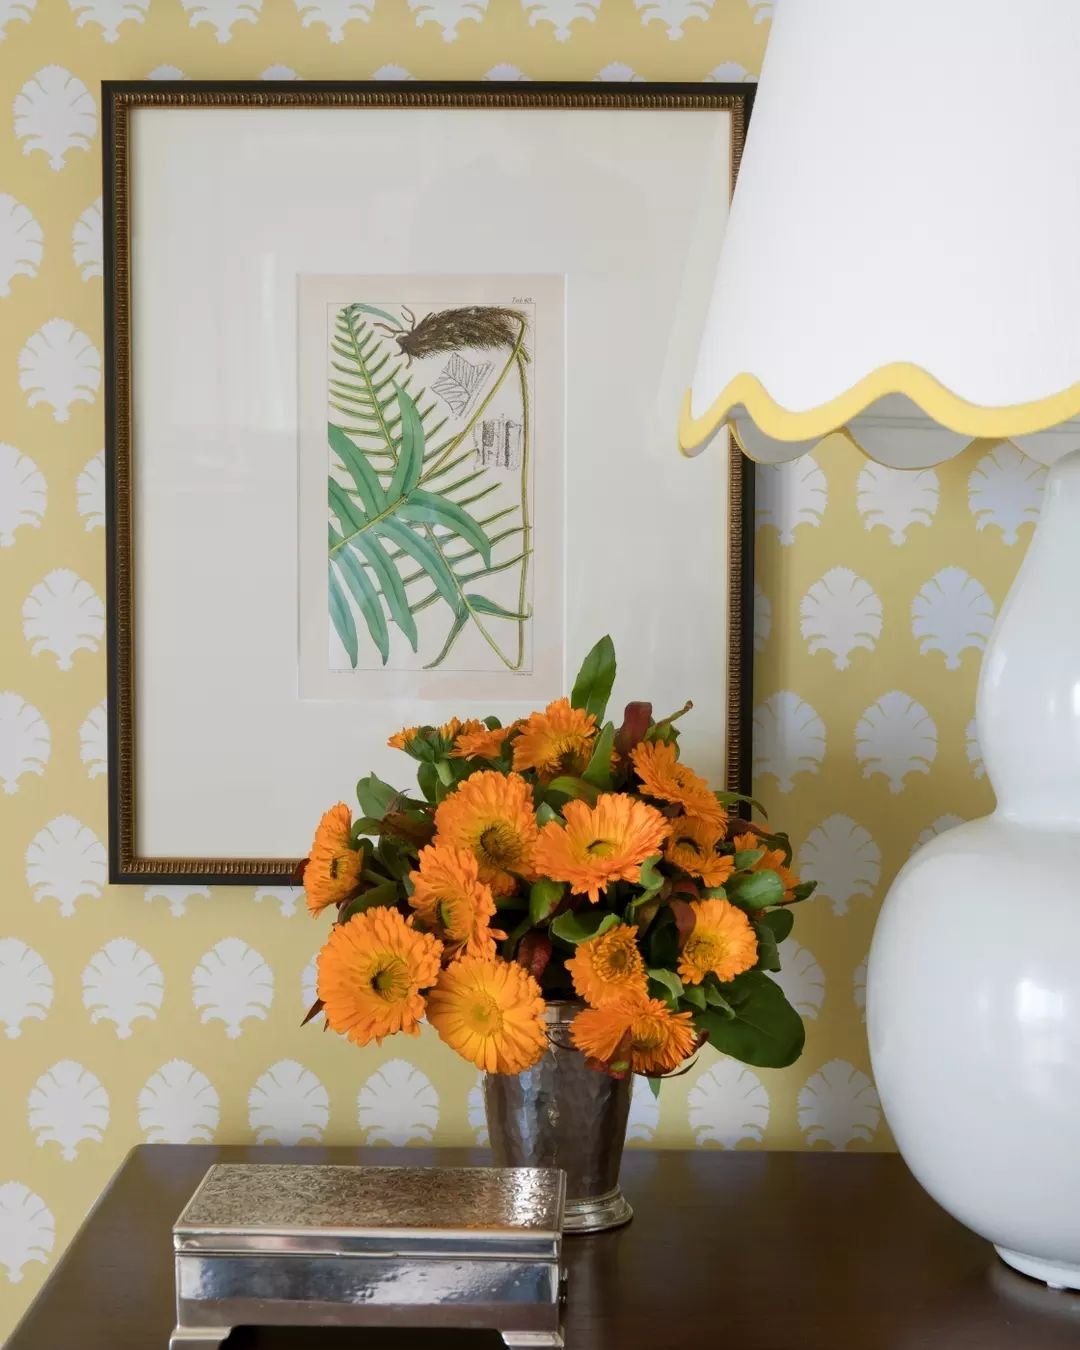 Close-up details of a clients guest bedroom I decorated. Every inch is beautiful. 

Photography @johndownsphotography